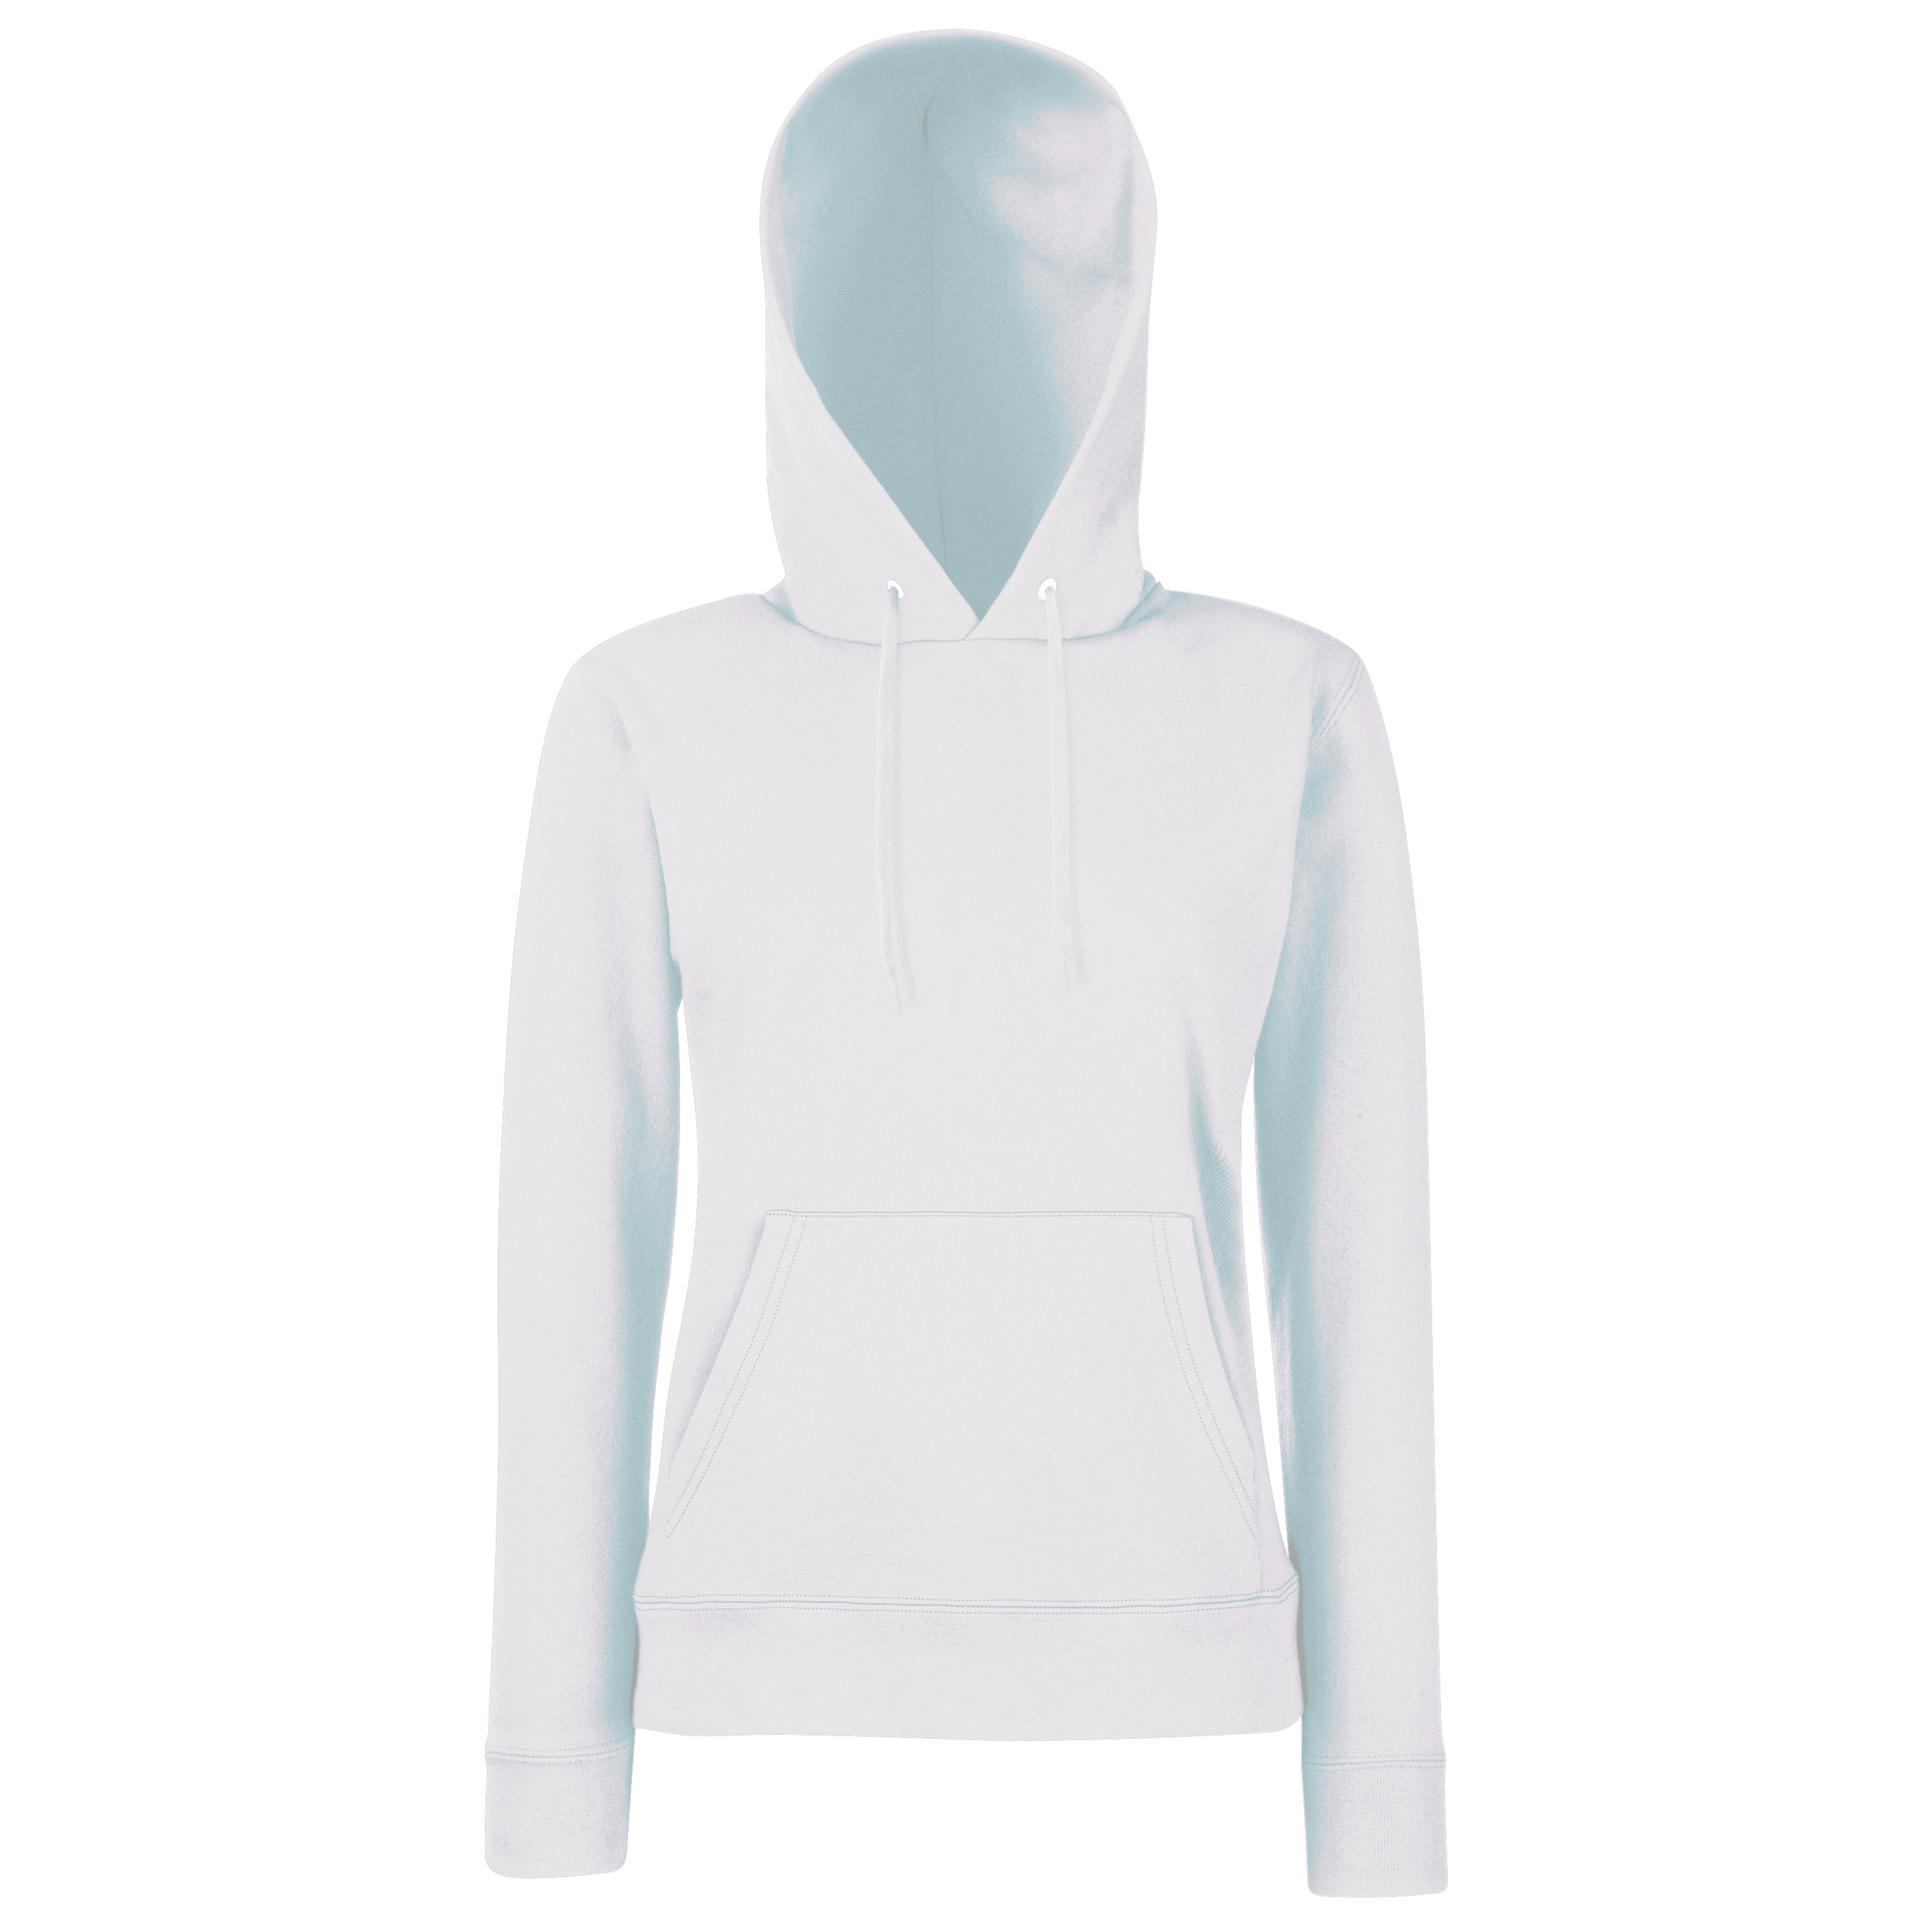 ax-httpswebsystems.s3.amazonaws.comtmp_for_downloadfruit-of-the-loom-womens-classic-80-20-hooded-sweatshirt-white.jpg